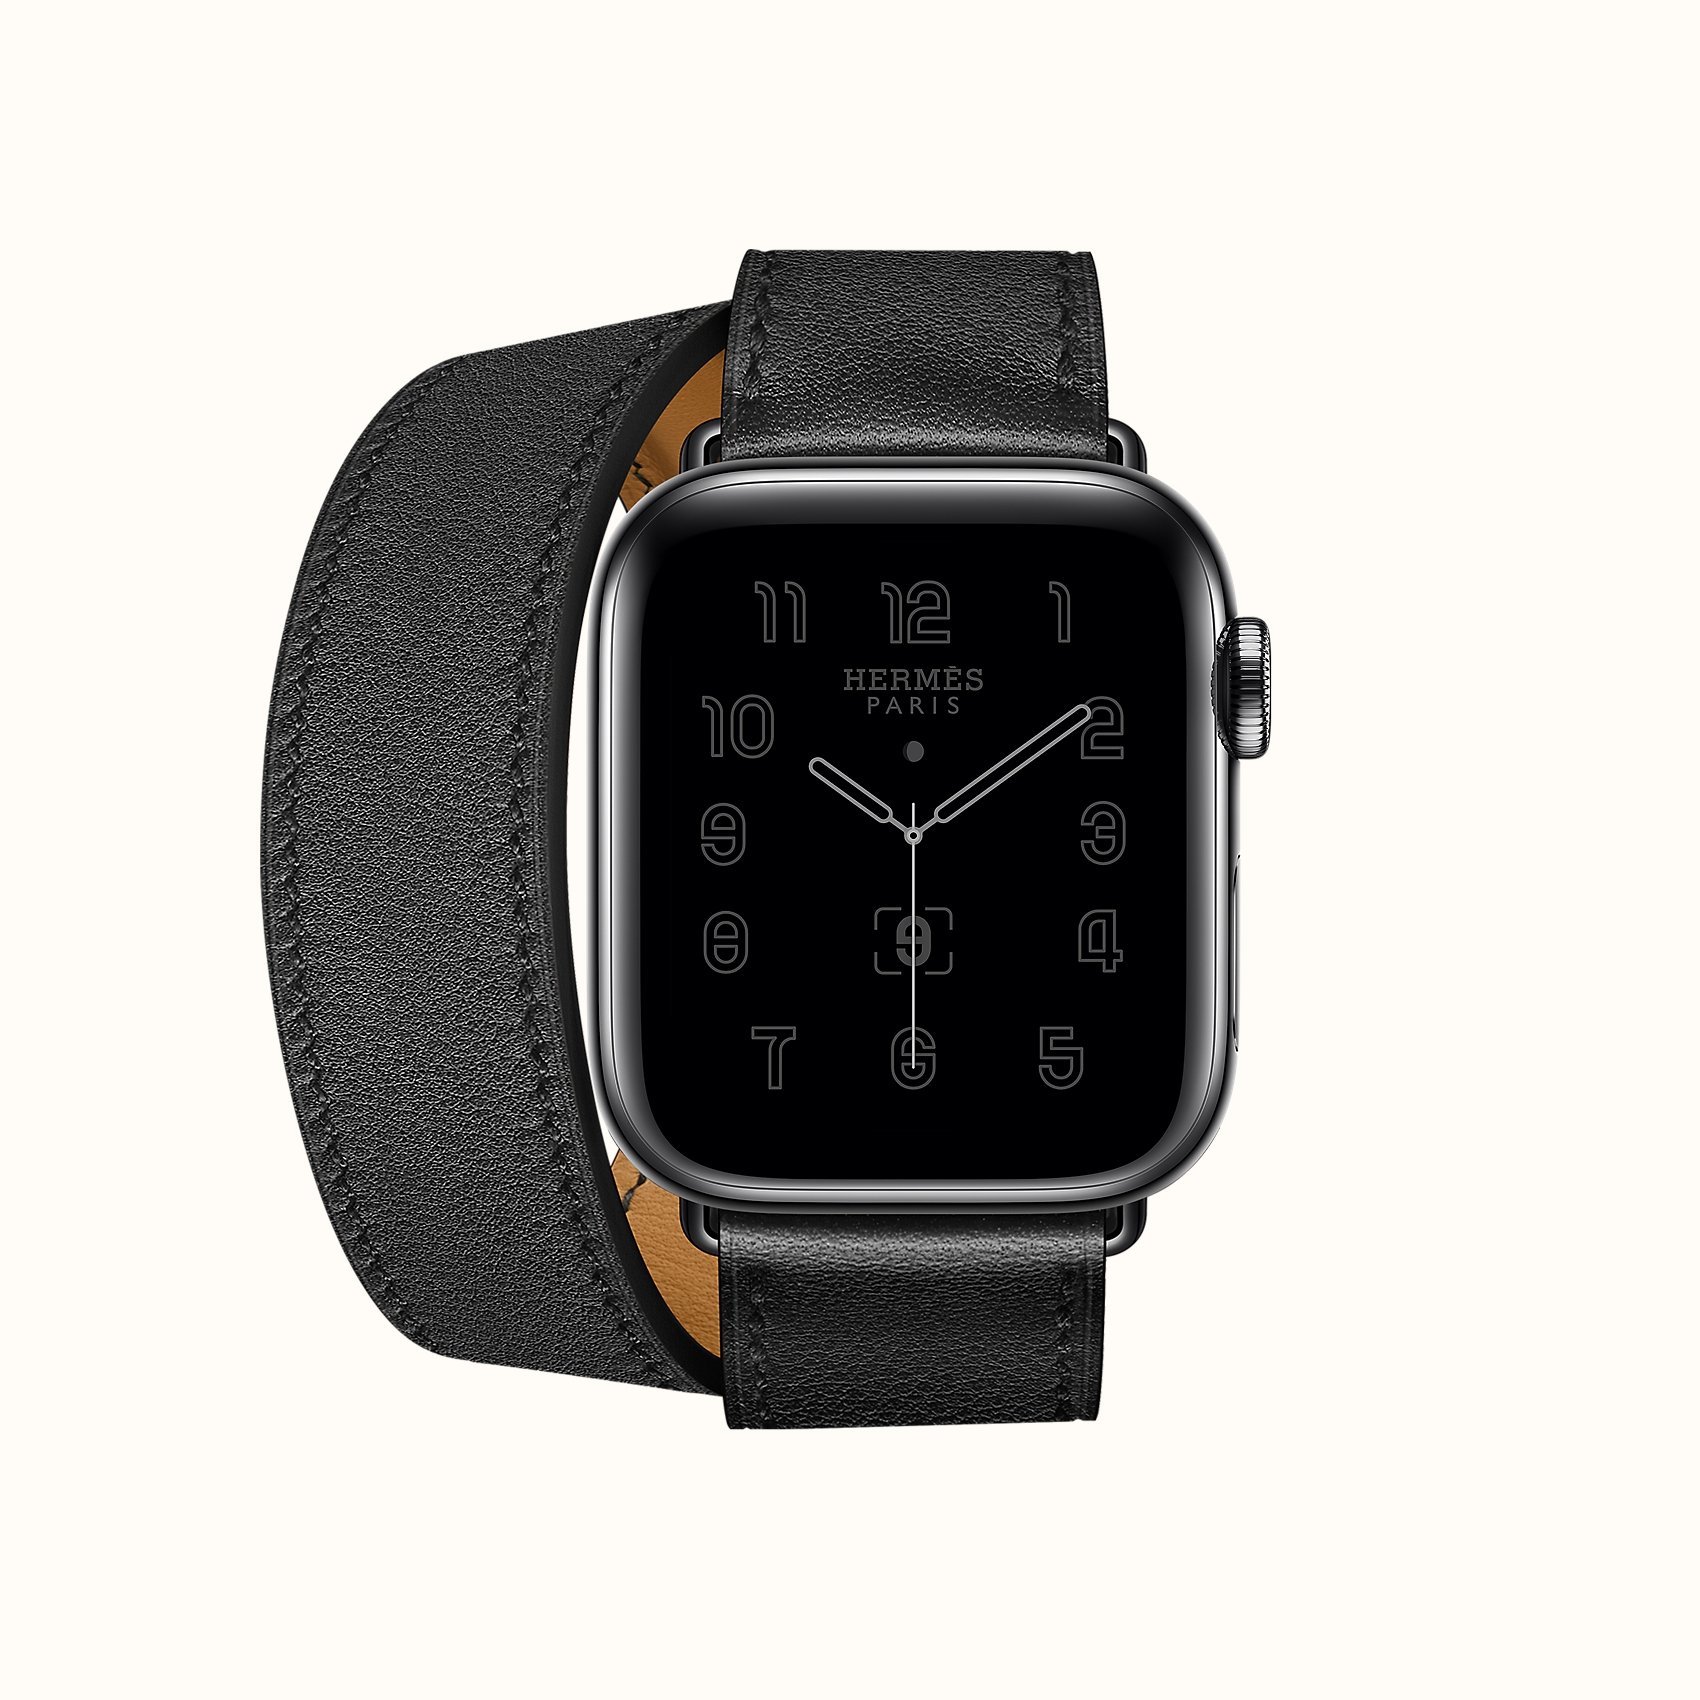 Space Black Series 6 case & Band Apple Watch Hermes Double Tour 40 mm